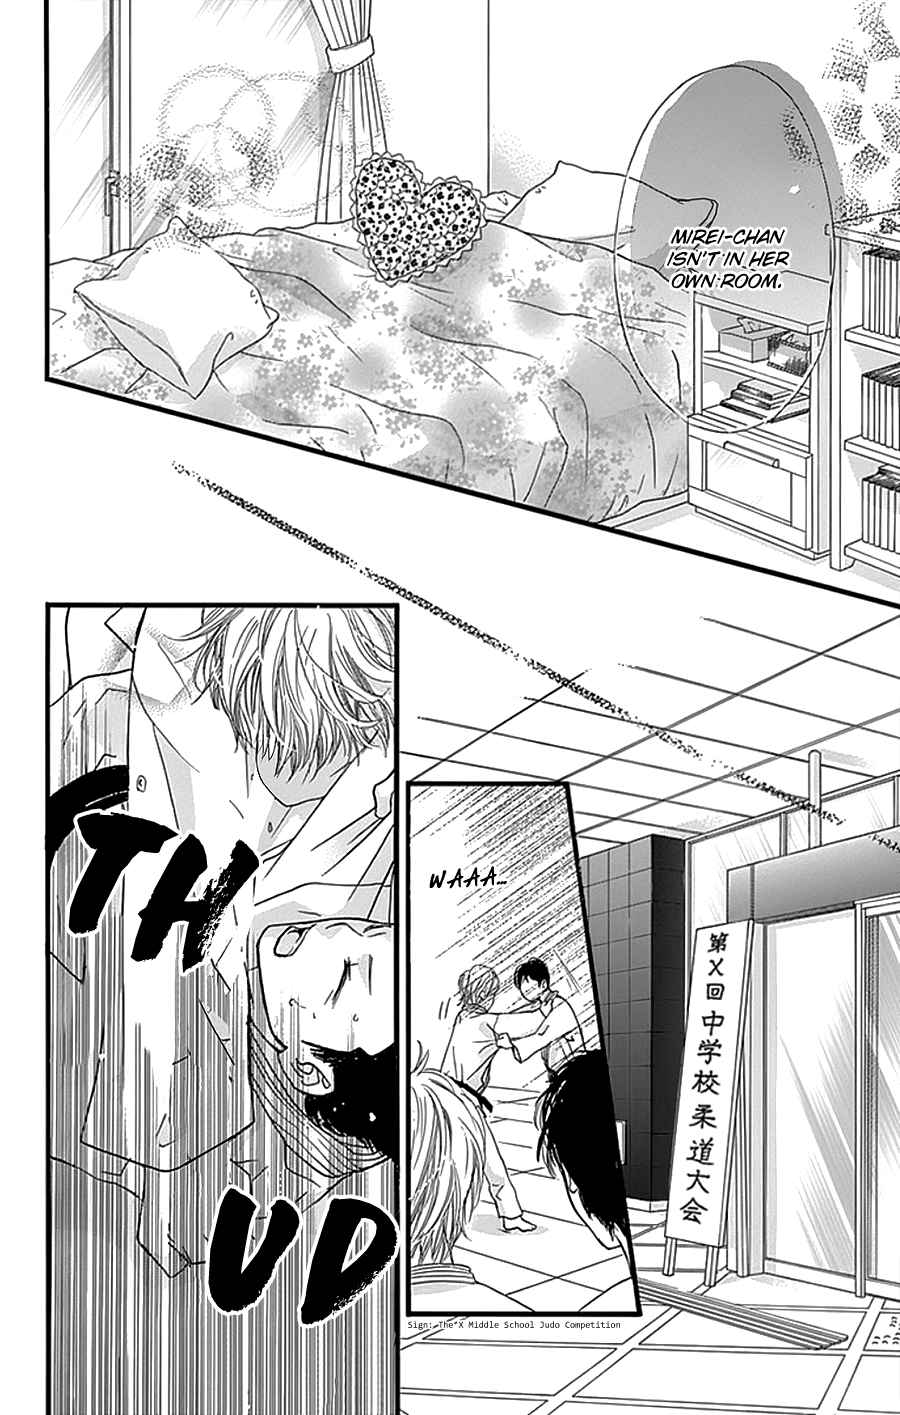 I Love You Baby Vol. 4 Ch. 25